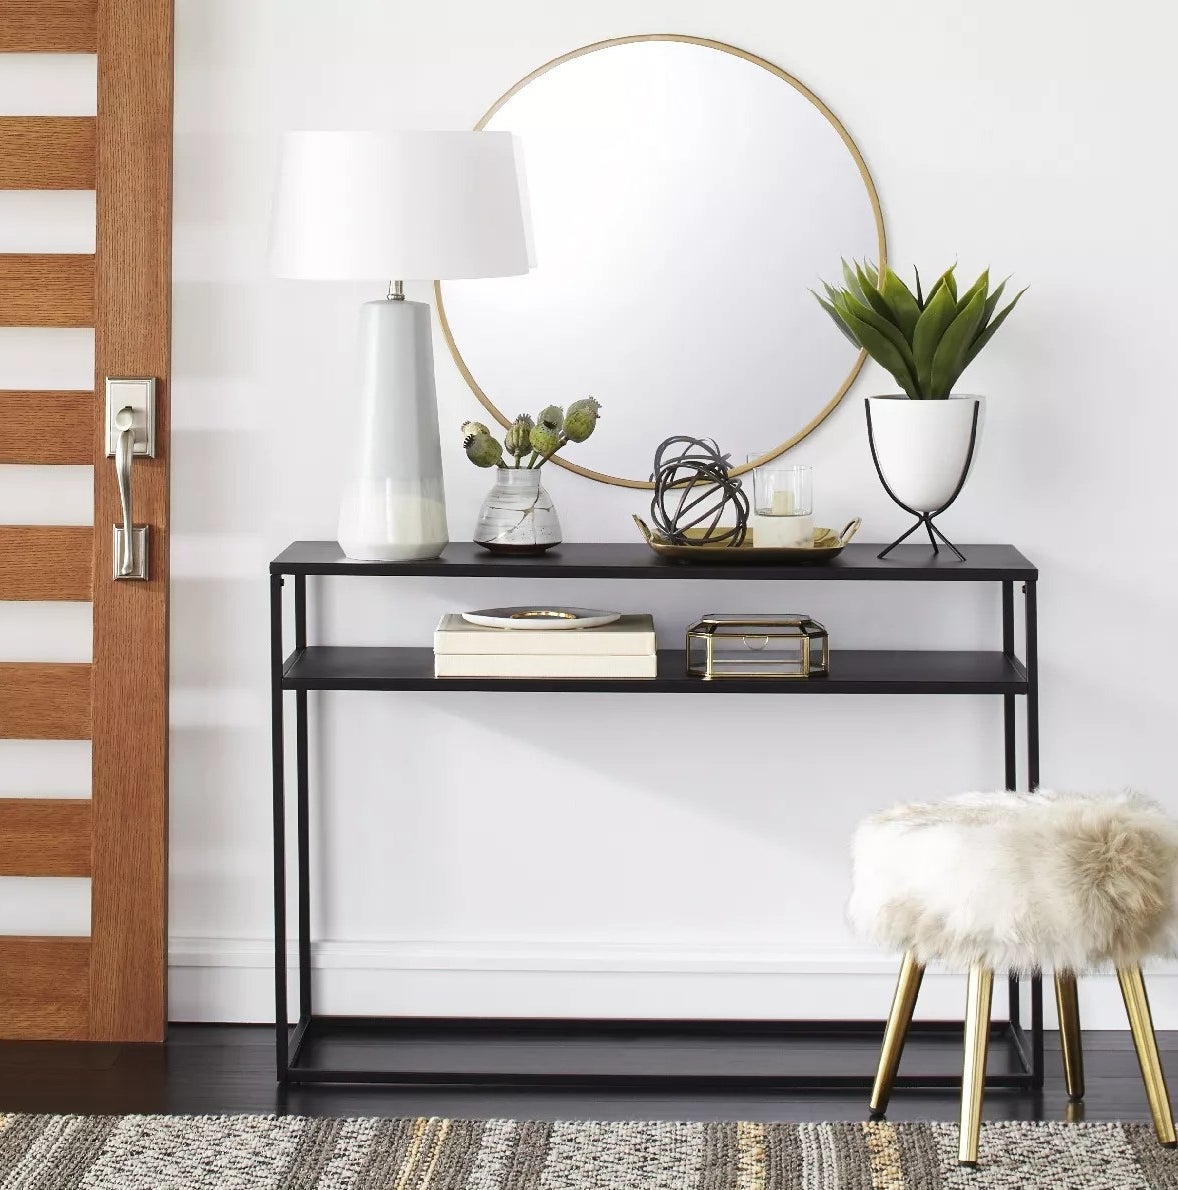 The narrow metal console with two open shelves in an entryway